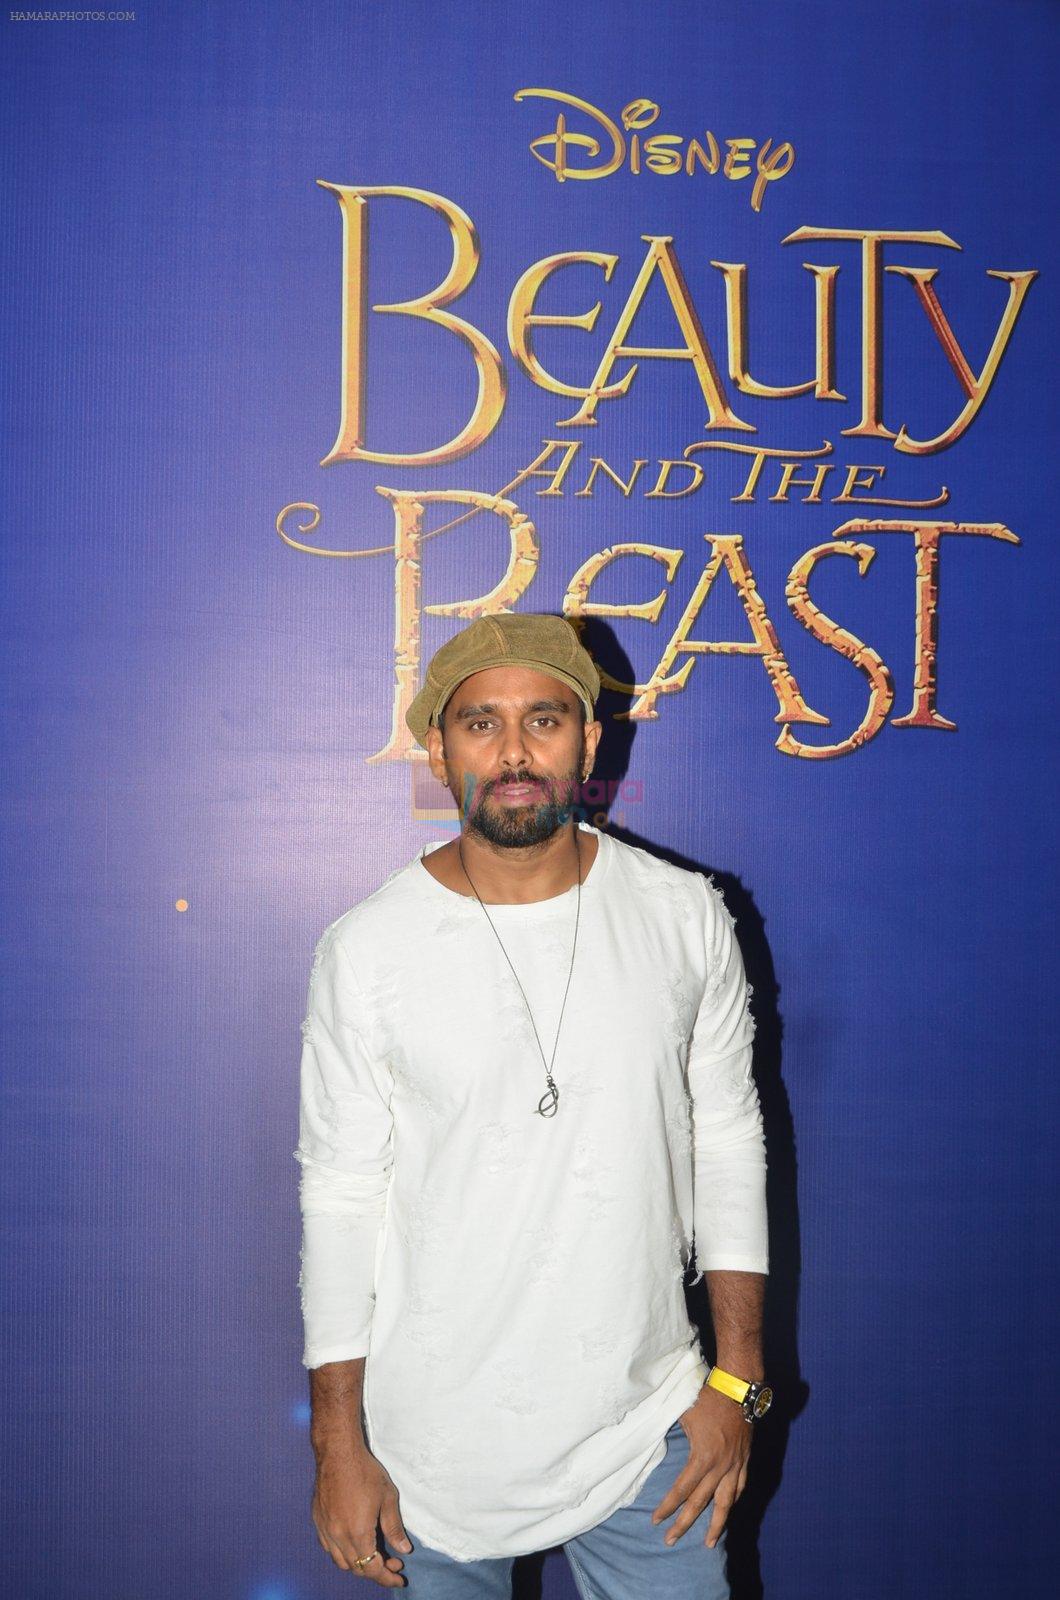 at Beauty and the Beast screening on 7th May 2016